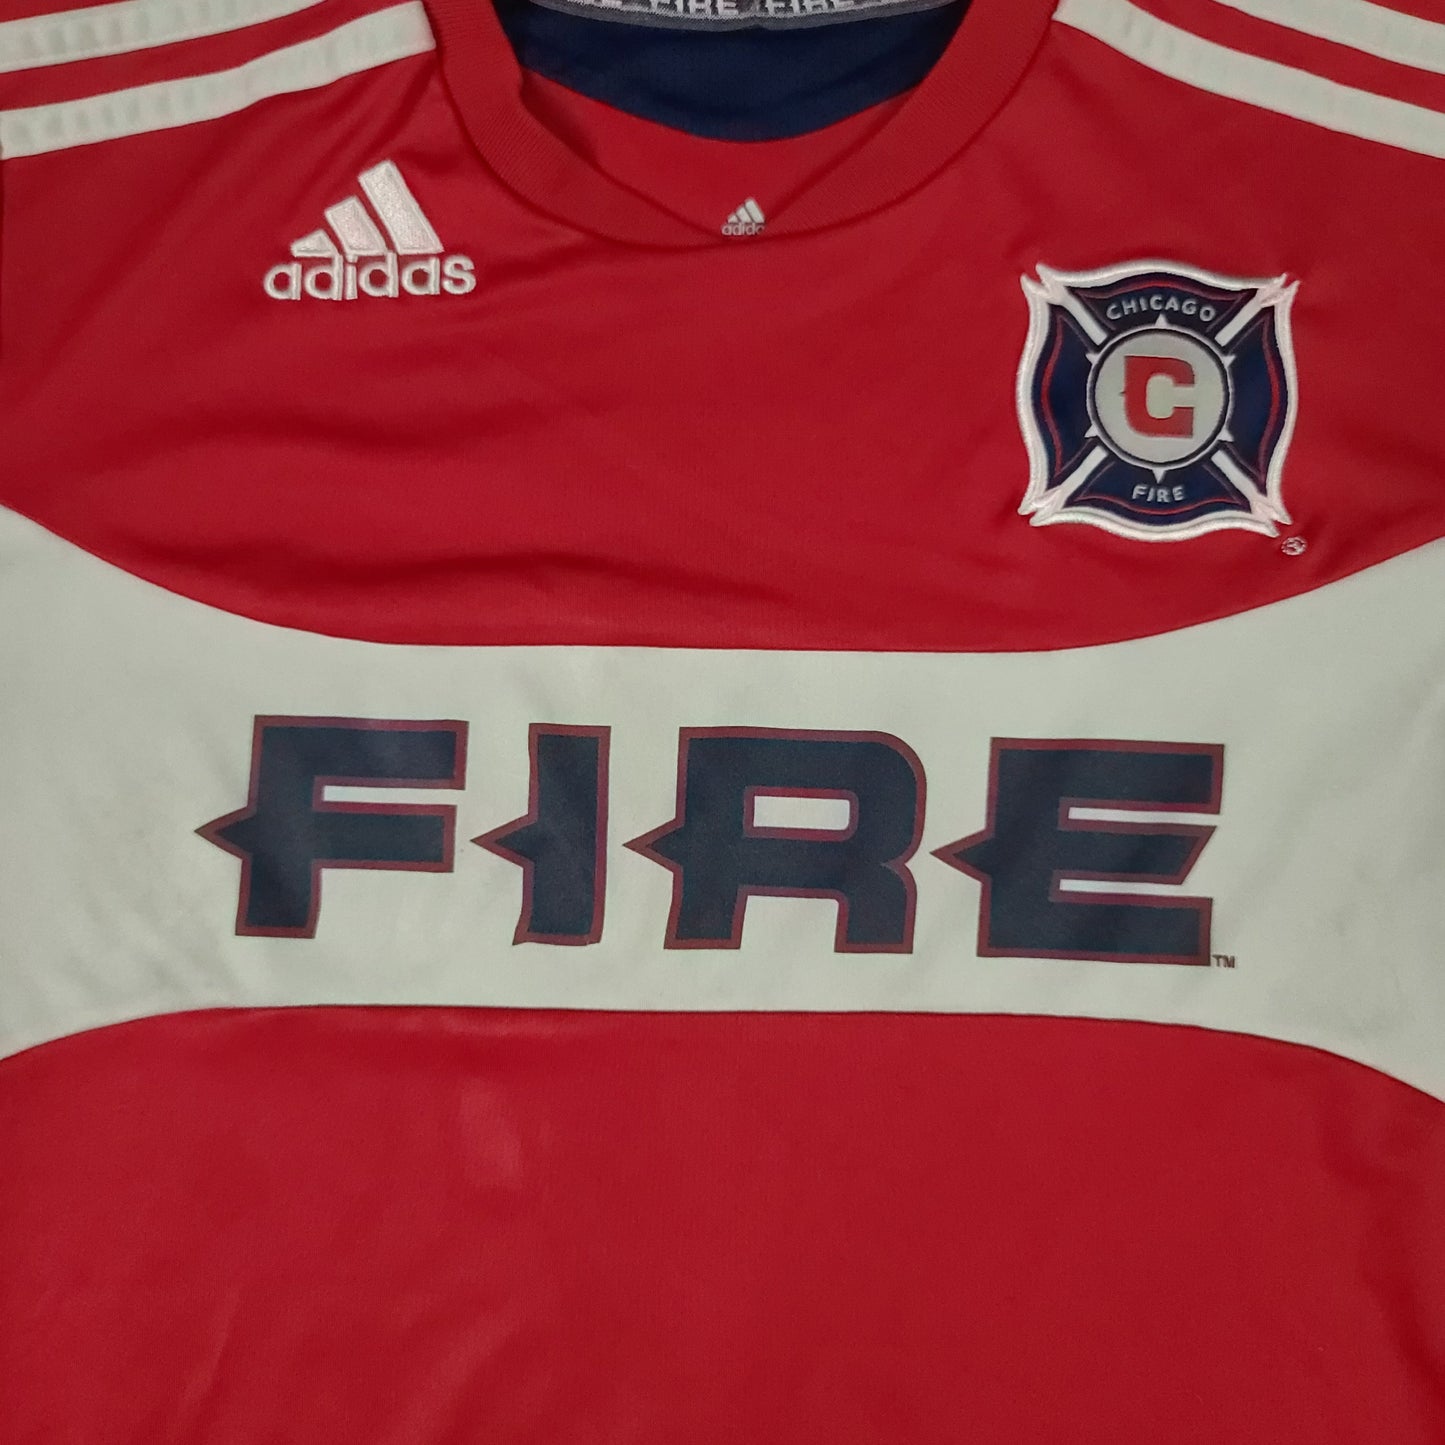 Chicago Fire Red adidas MLS Soccer Jersey